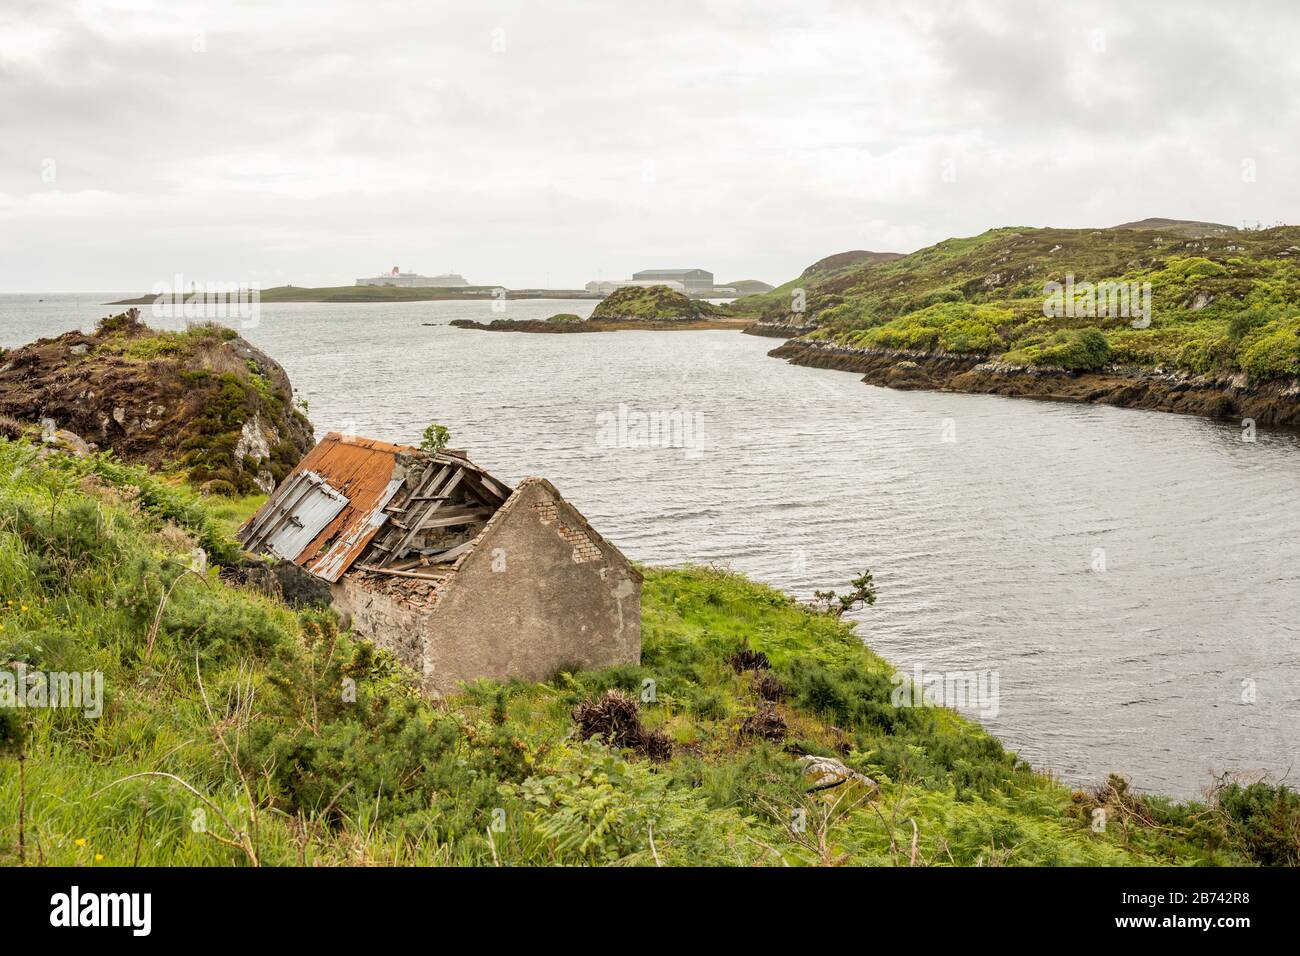 An abandoned cottage on the shore of Stornoway Bay, in the grounds of Lews Castle, Stornoway, Scotland, UK.  Cunard ship Queen Eliszabeth can be seen. Stock Photo